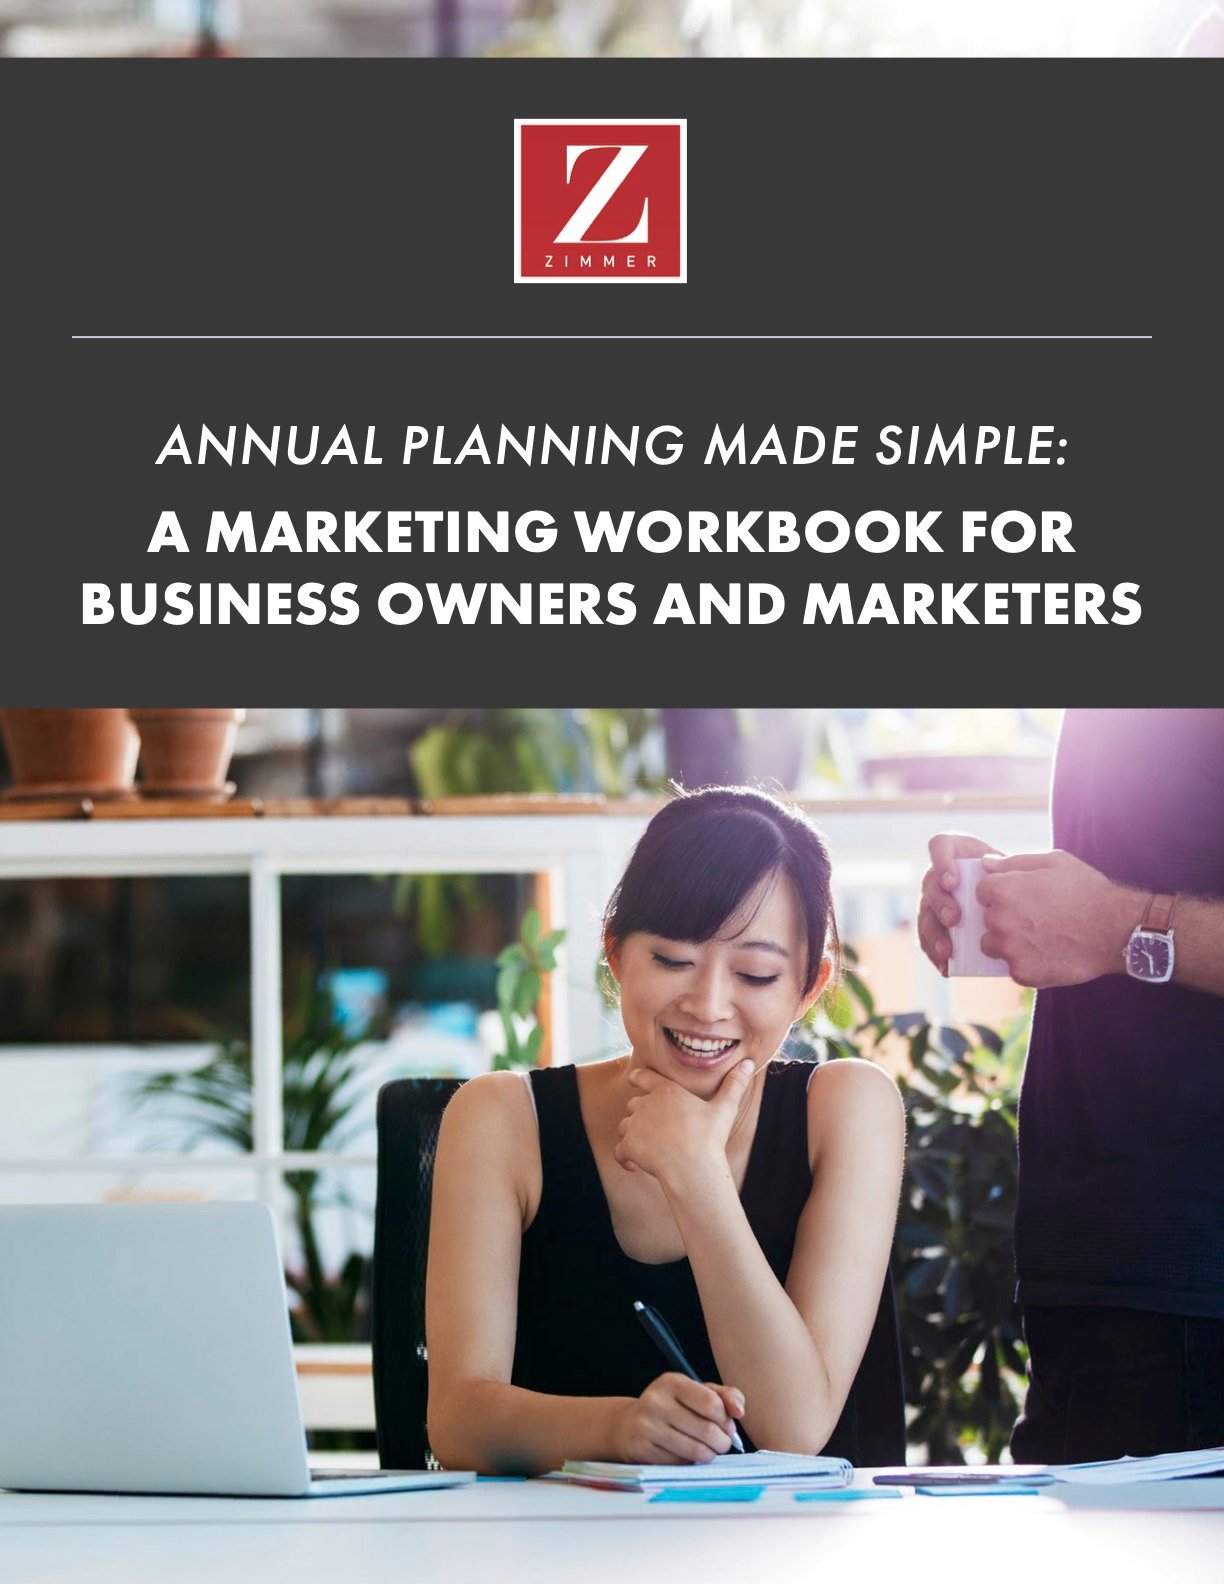 Annual Planning Made Simple: A Marketing Workbook for Business Owners and Marketers